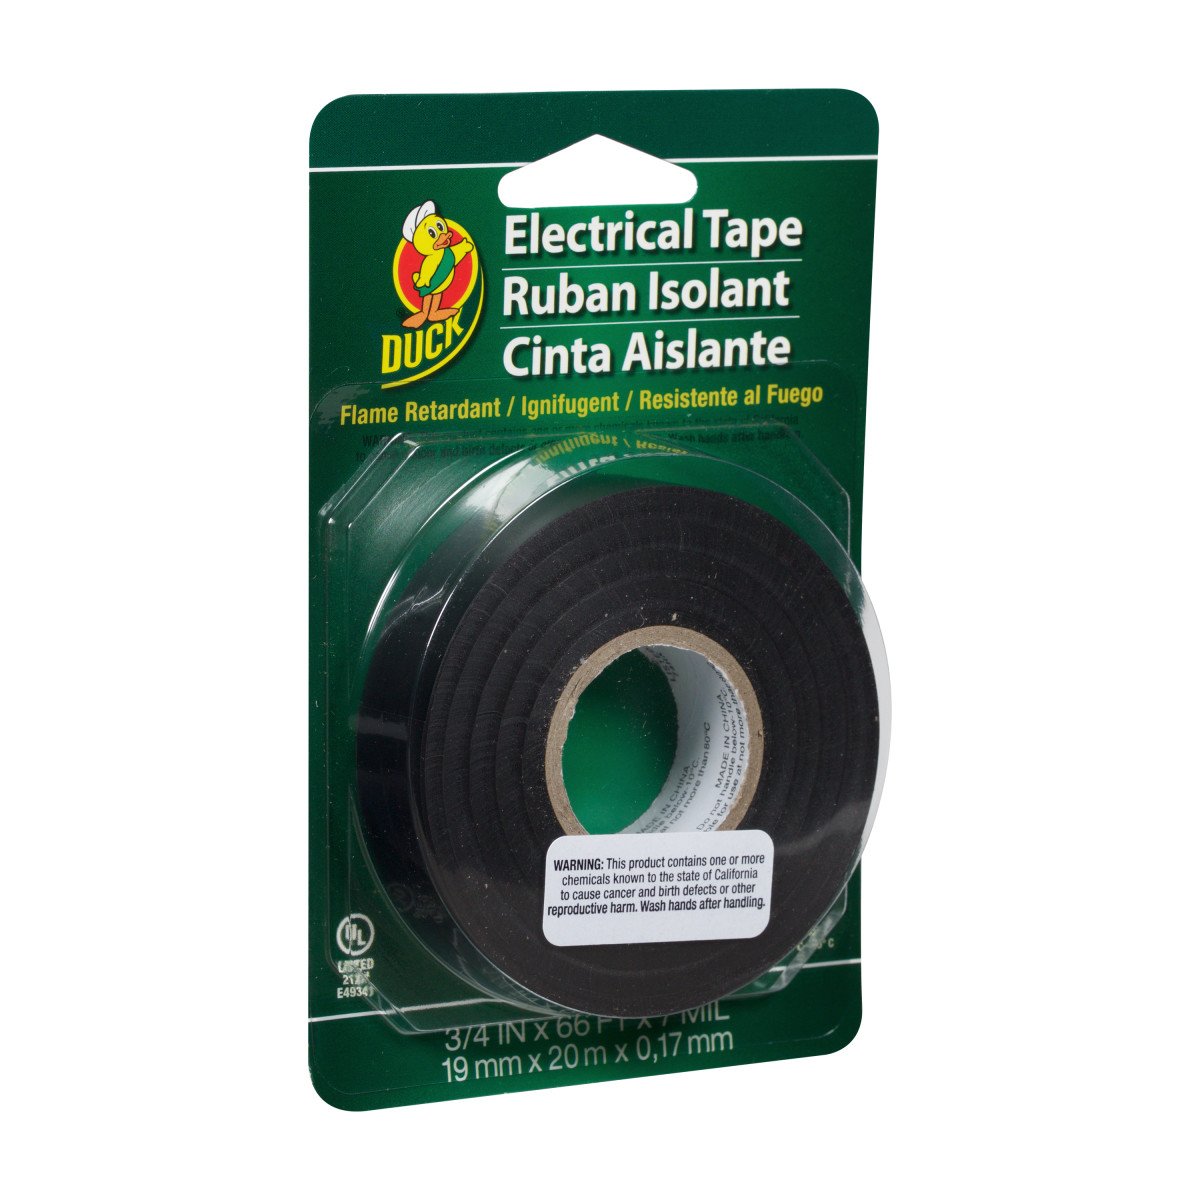 Duck Comic Book Duck Tape 1.88 Inch x 10 YD - Shop Adhesives & Tape at H-E-B